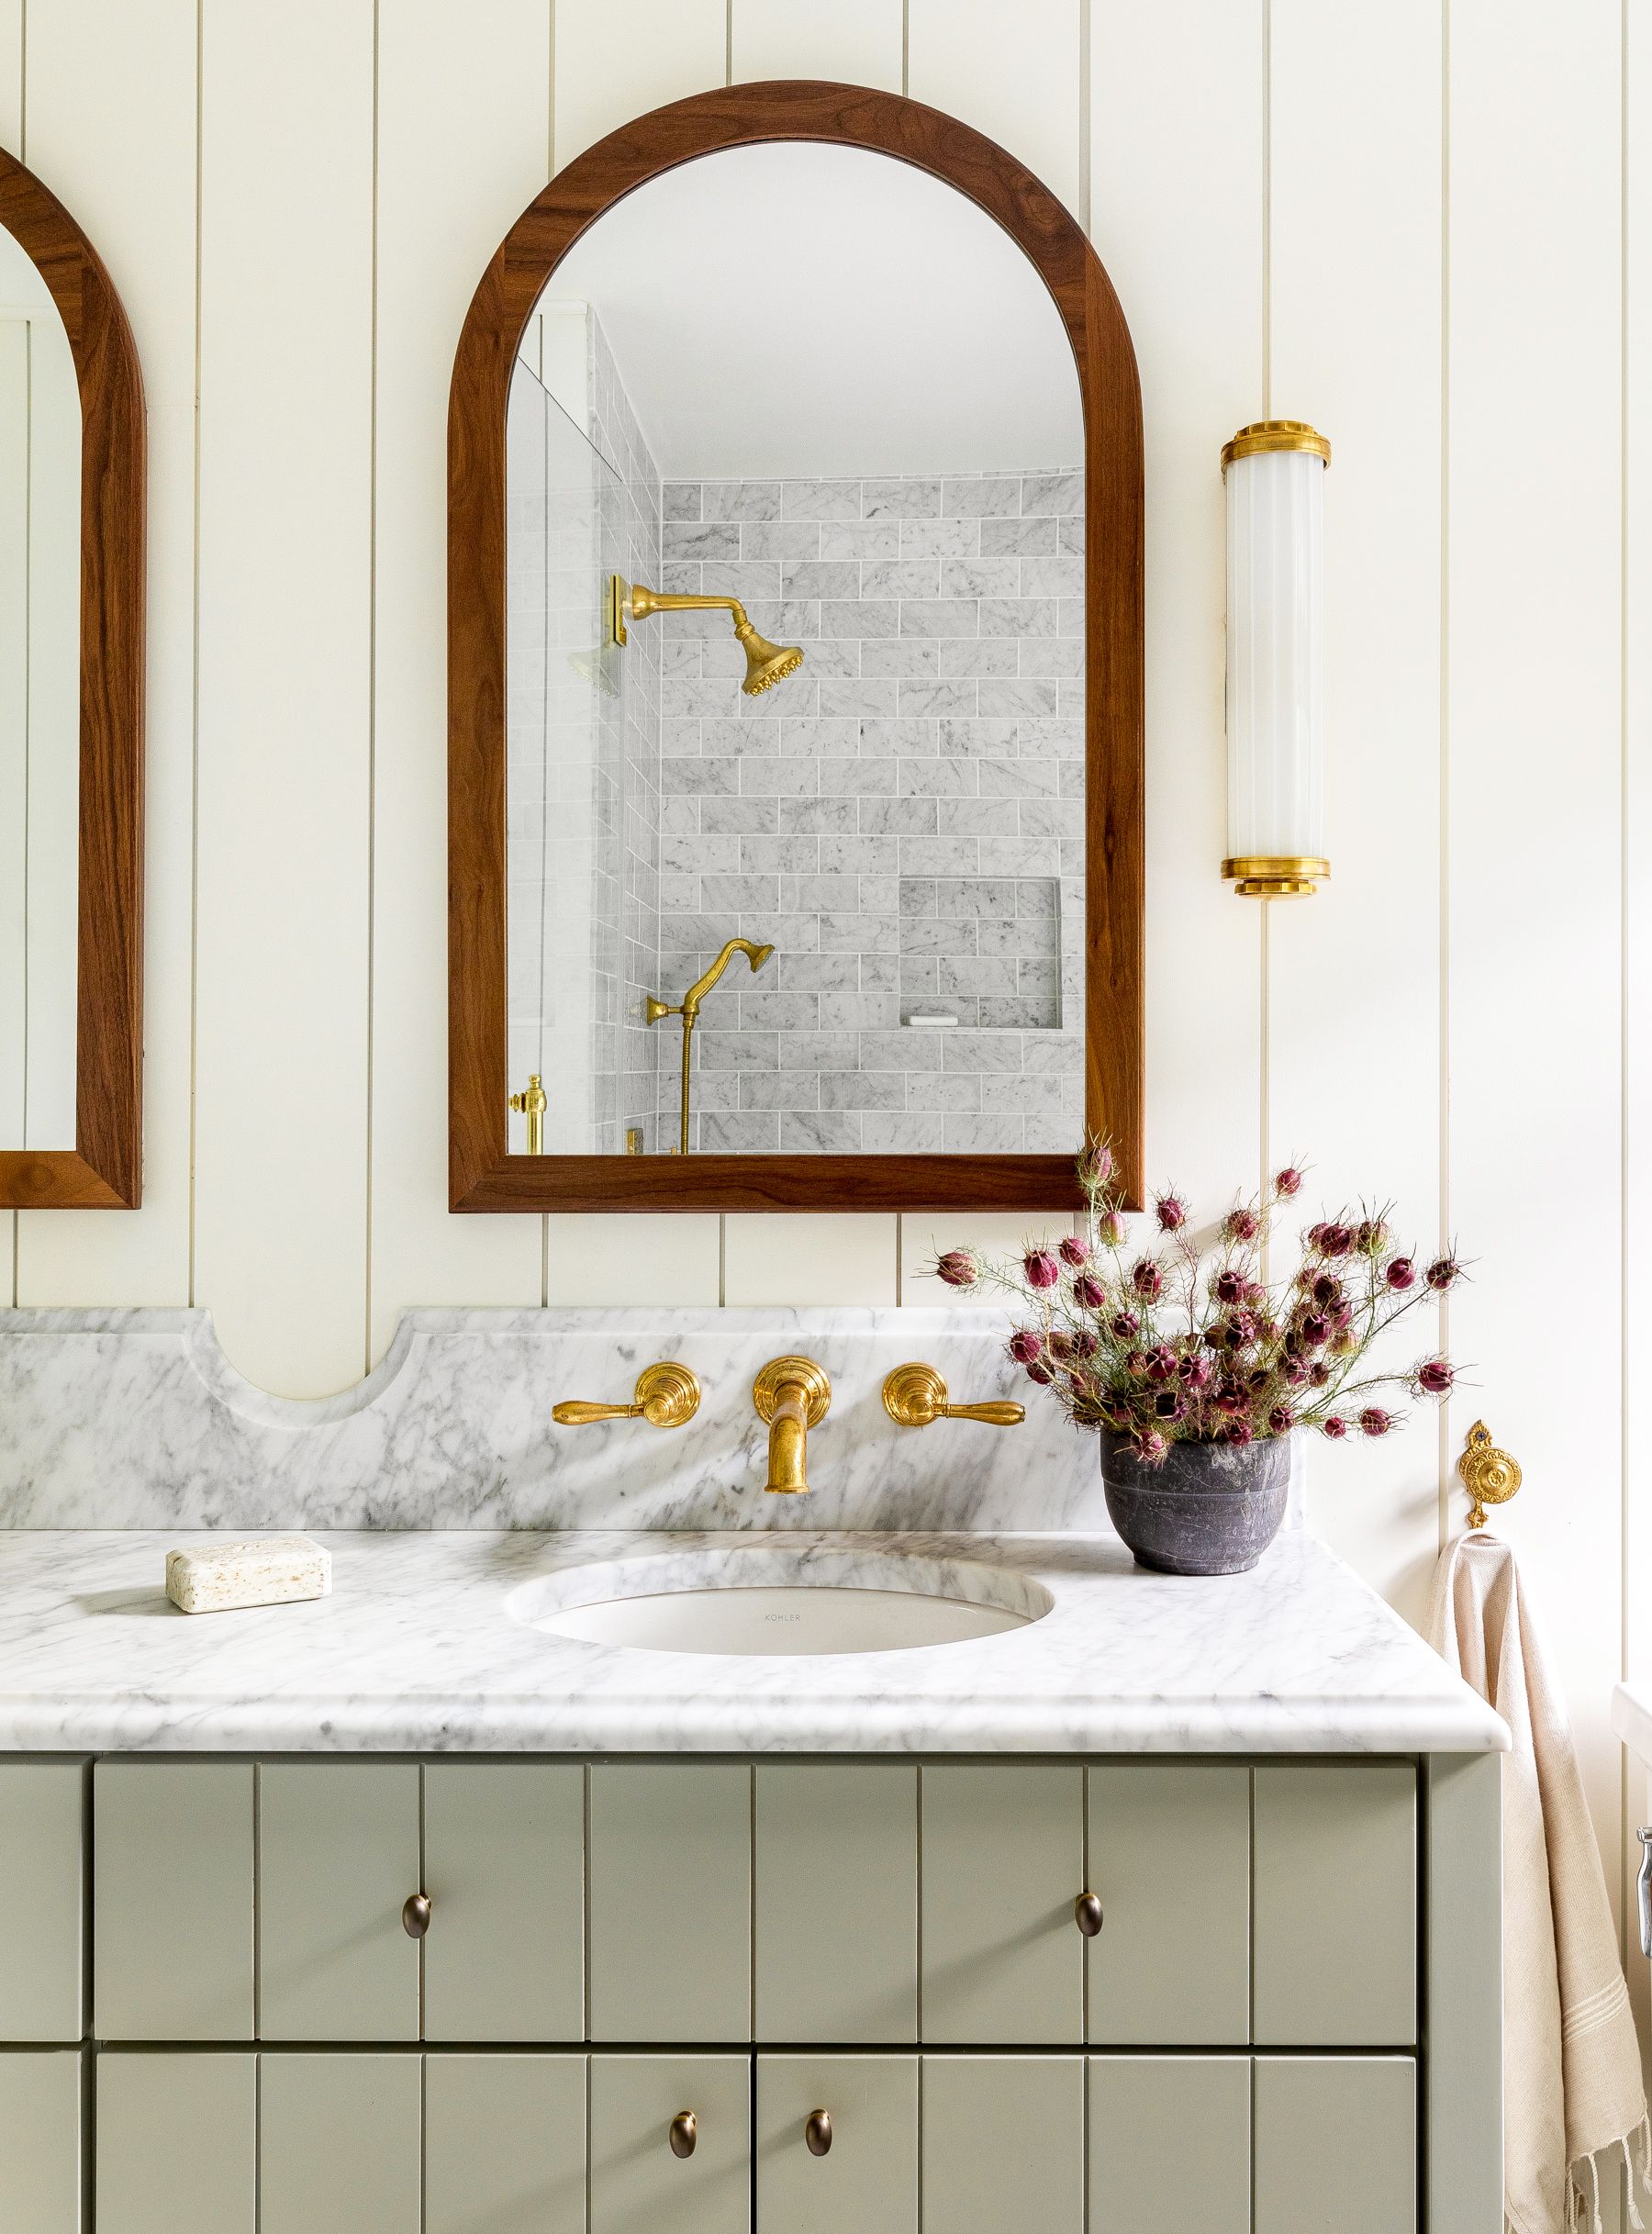 30 Bathroom Lighting Ideas for Every Decorating Style